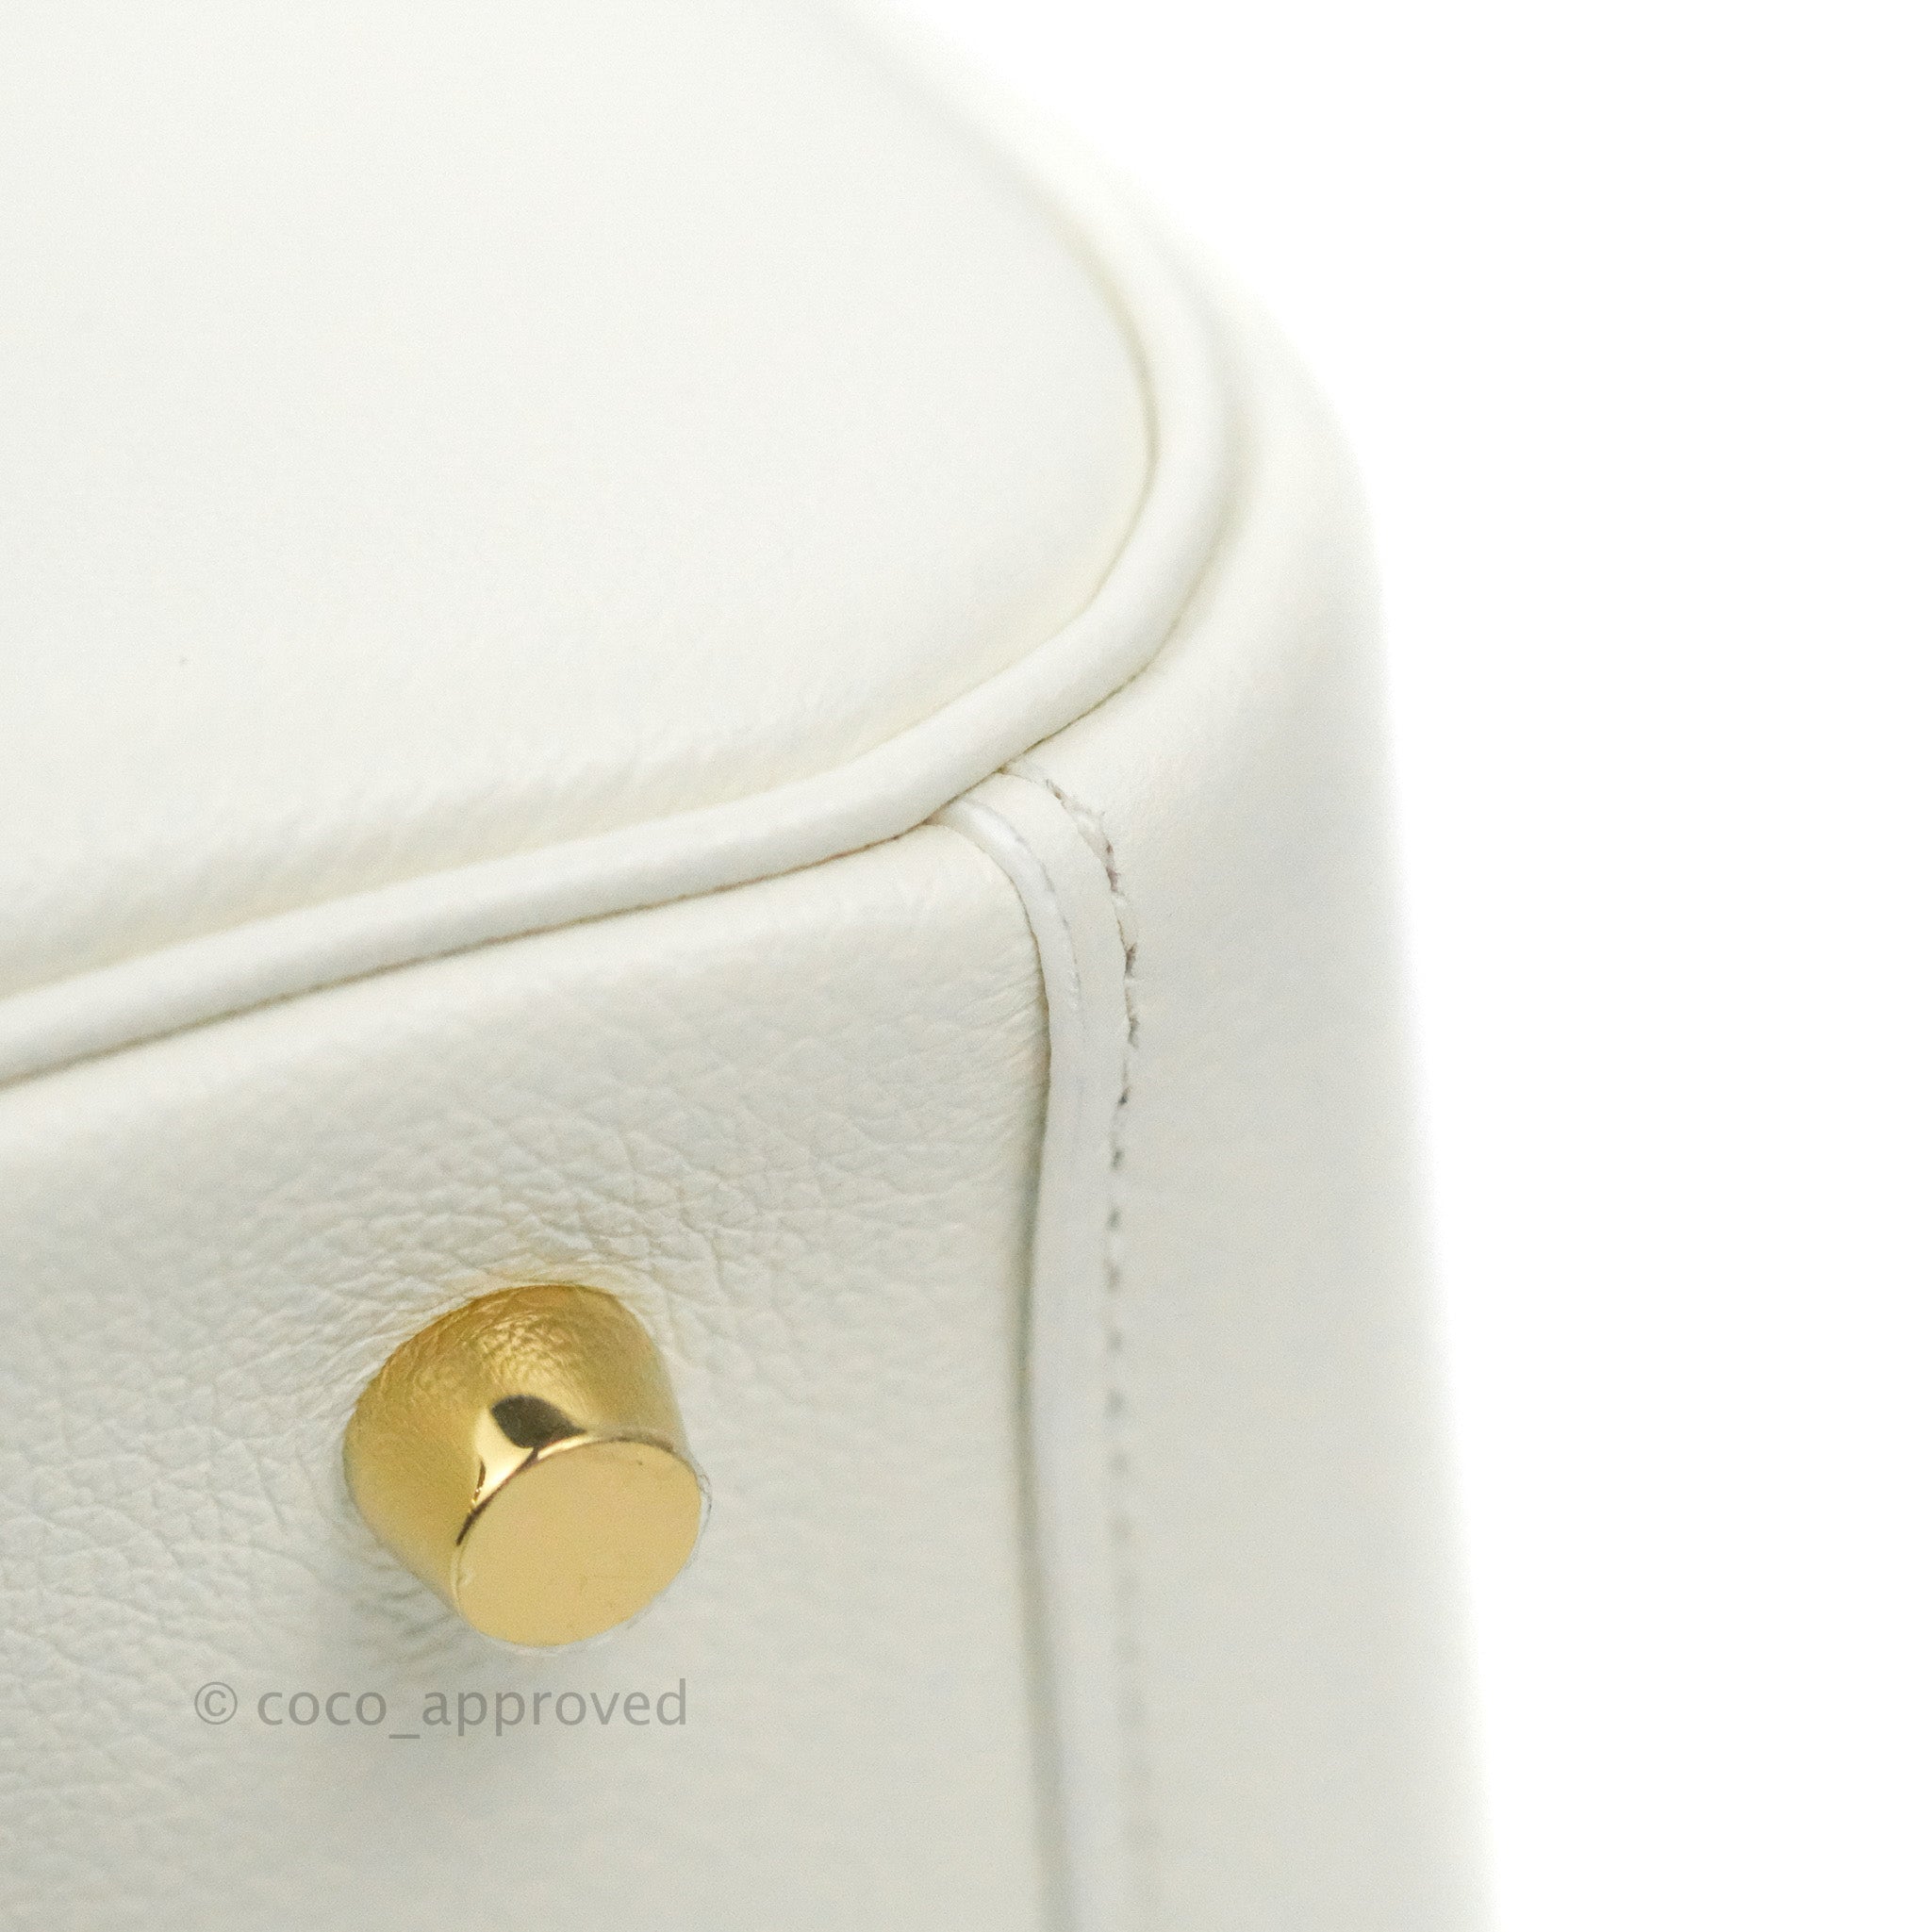 HERMES Lindy Size 26 New White Evercolor– GALLERY RARE Global Online Store